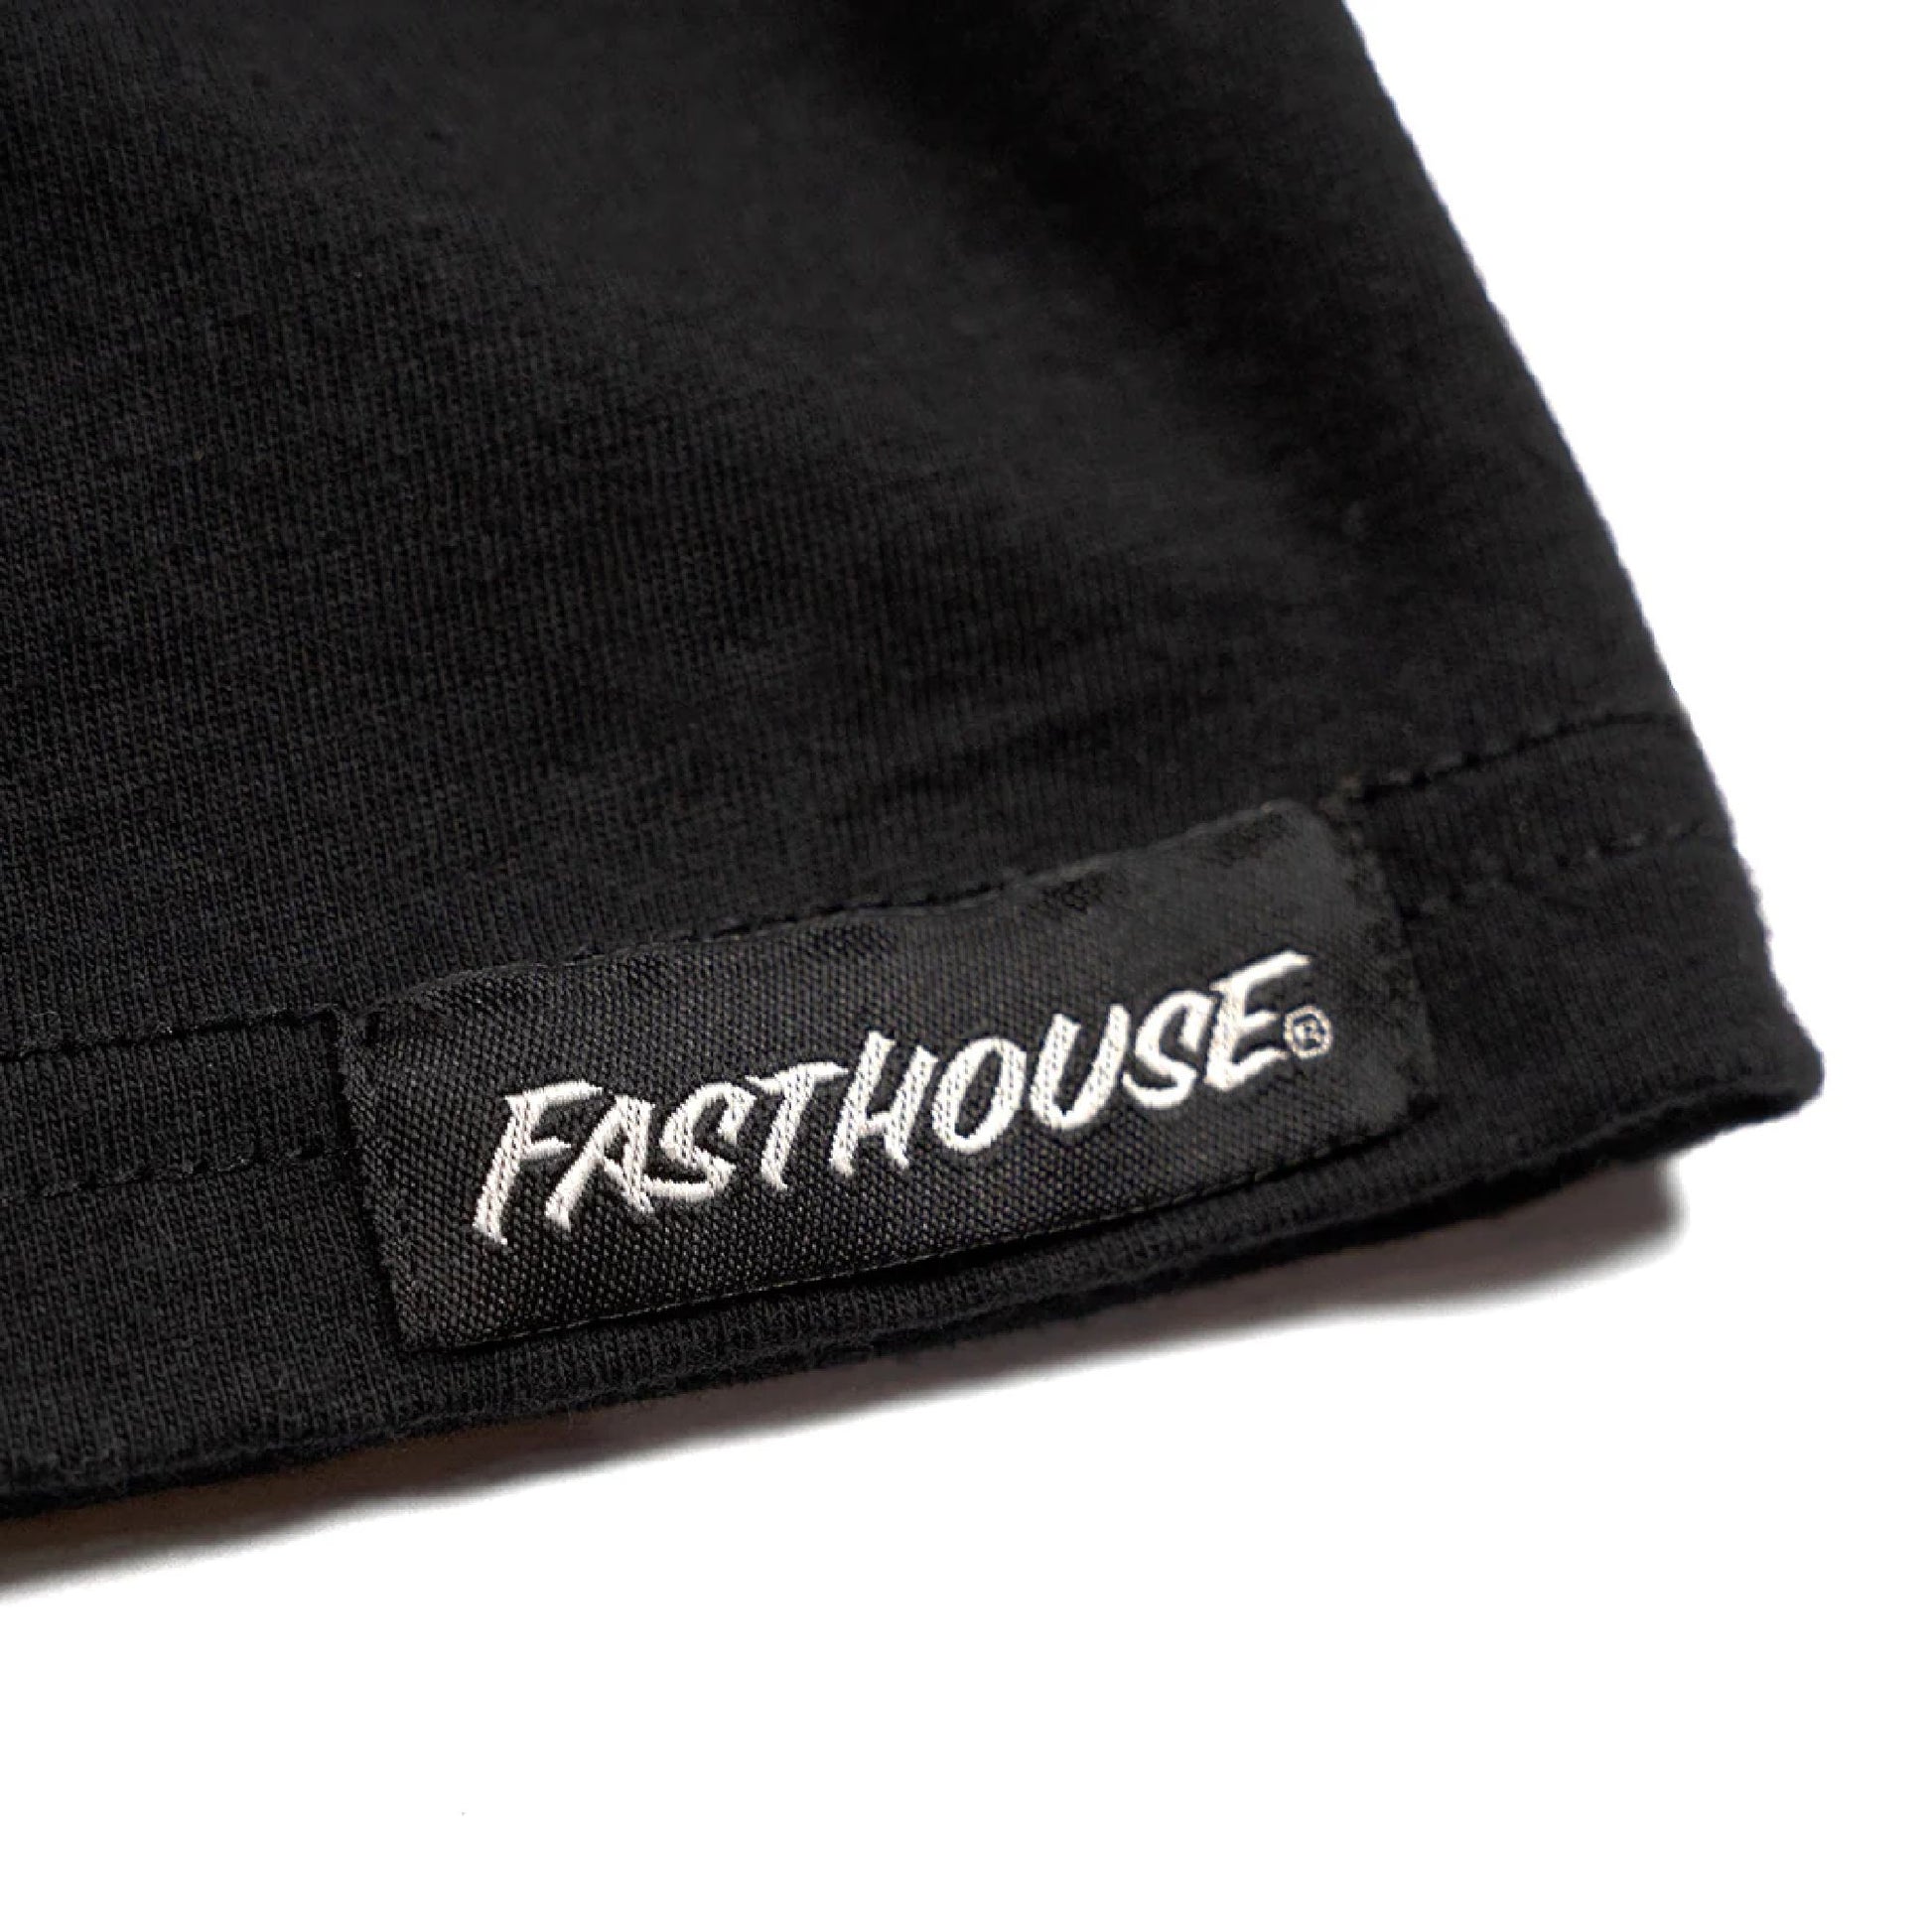 Fasthouse Girl's Breezy SS Tee Black SS Shirts